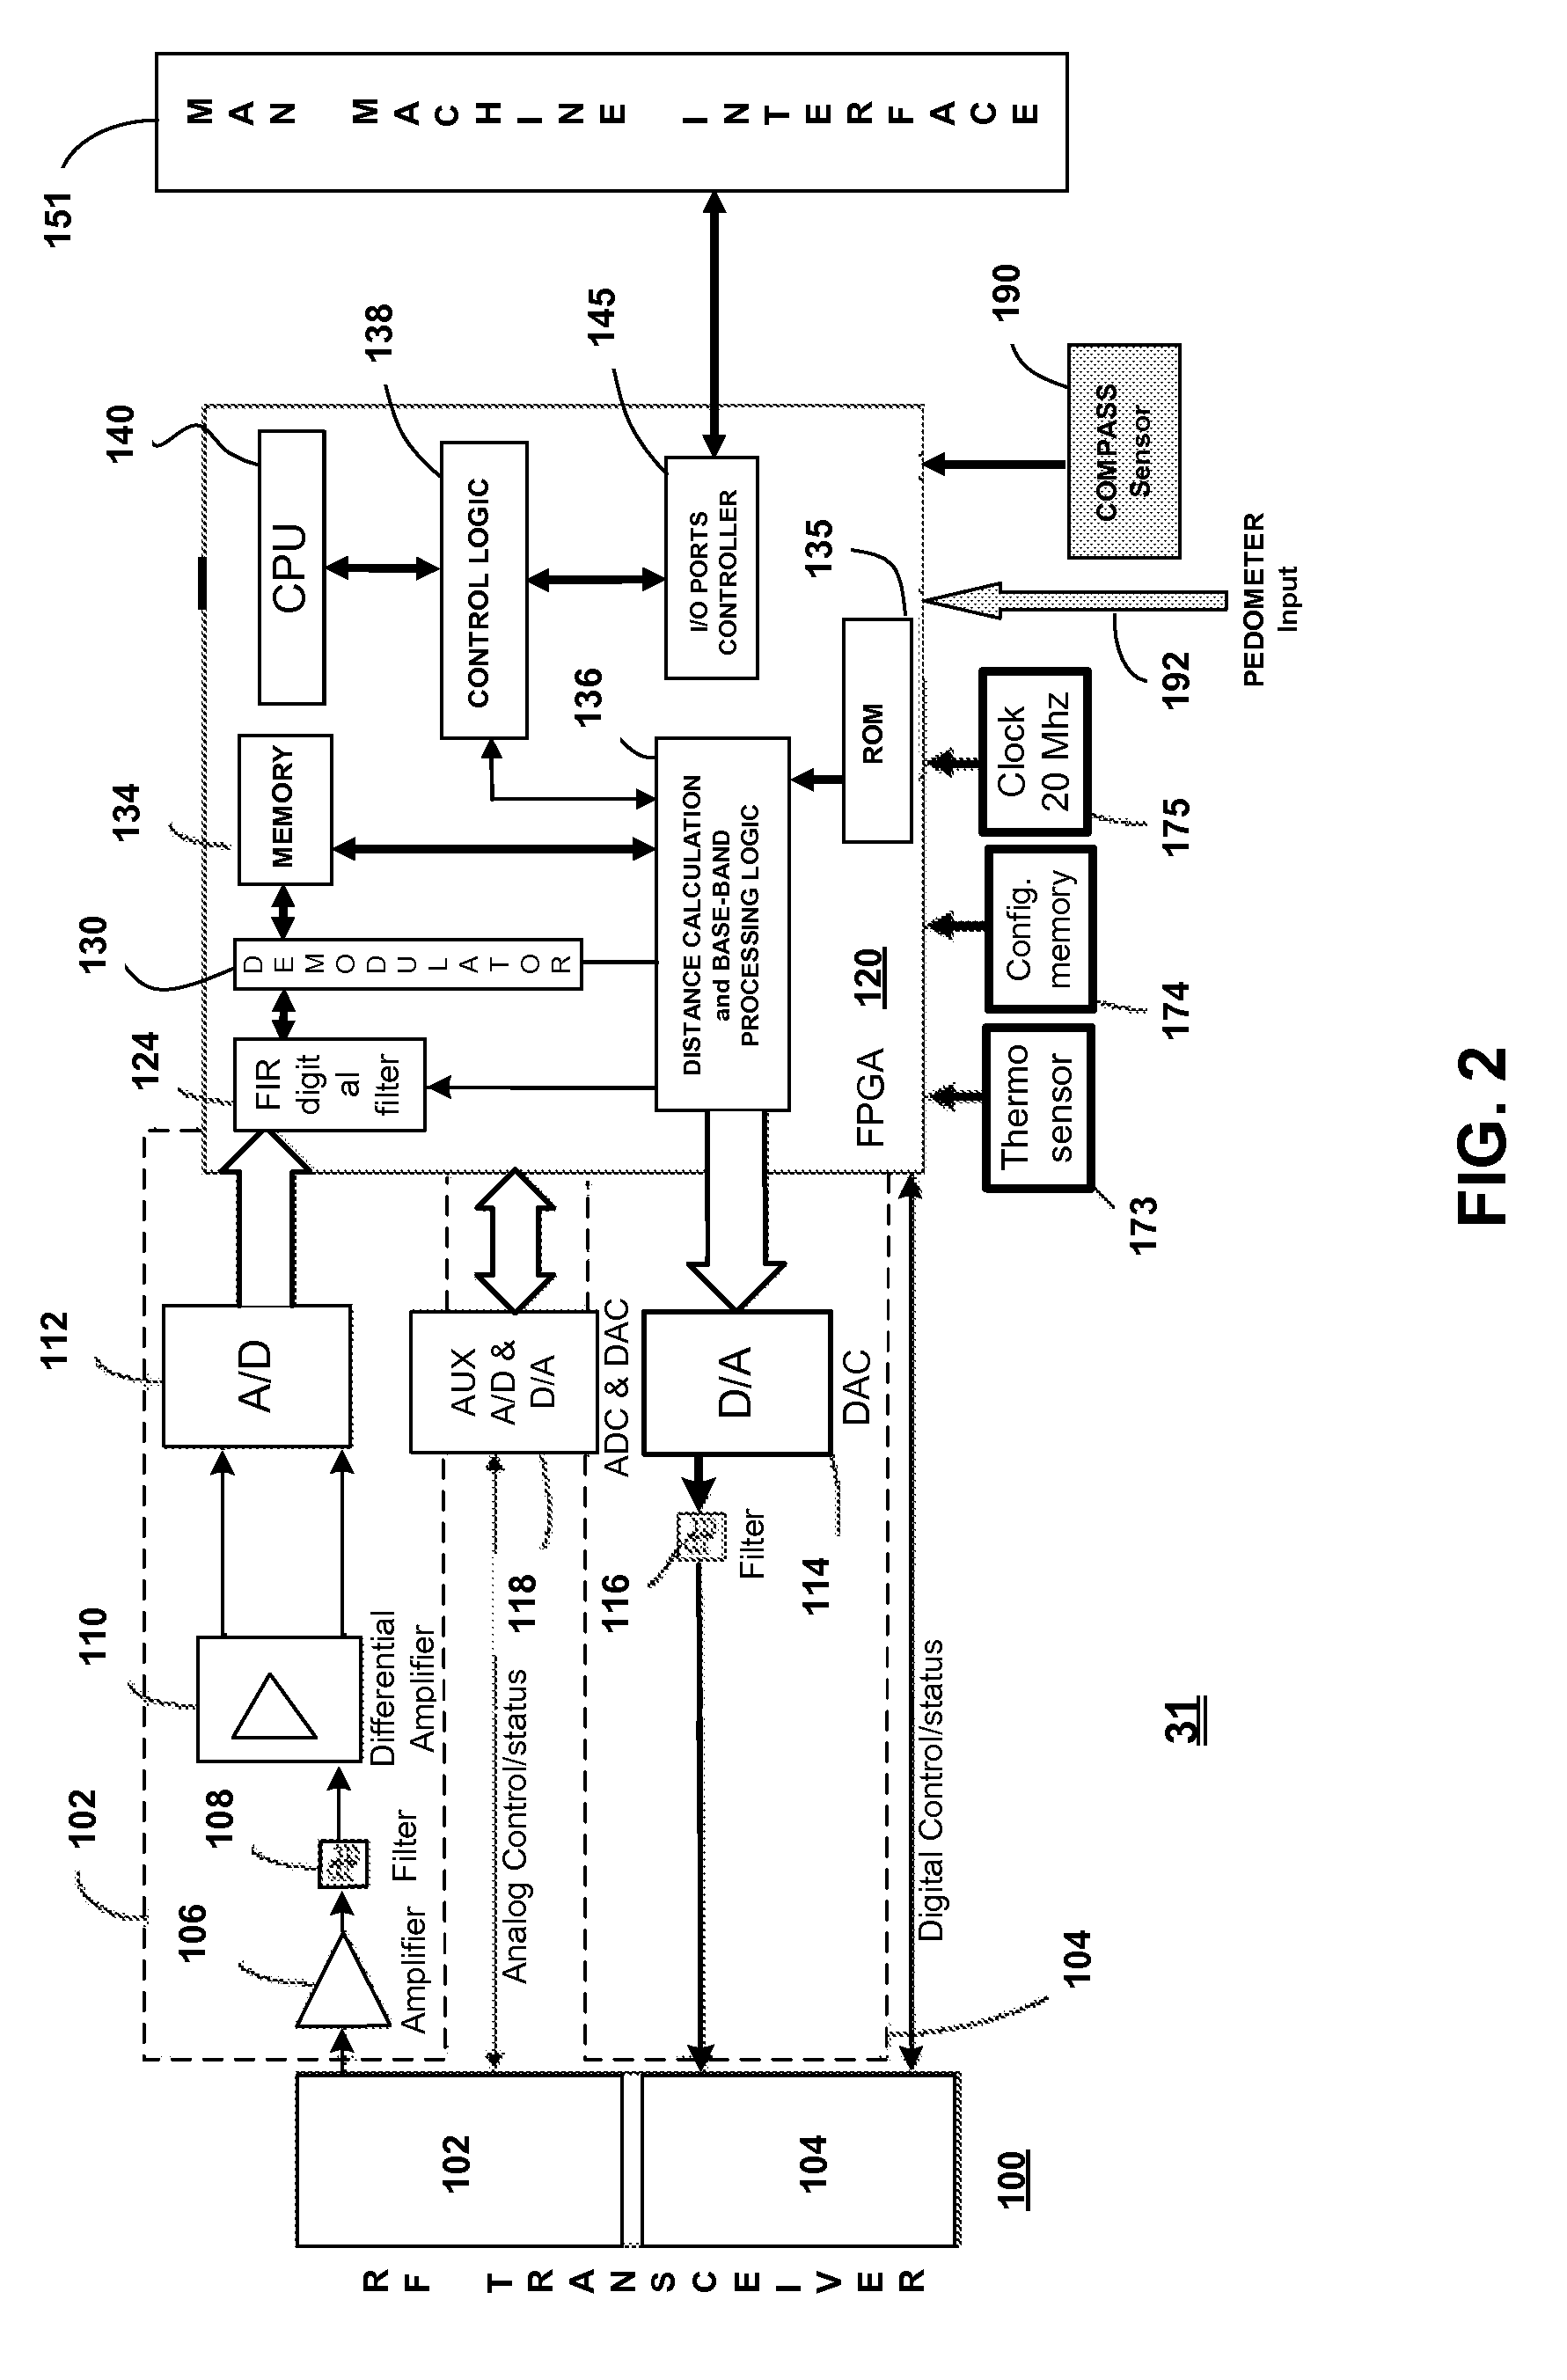 Method and system for positional finding using rf, continuous and/or combined movement